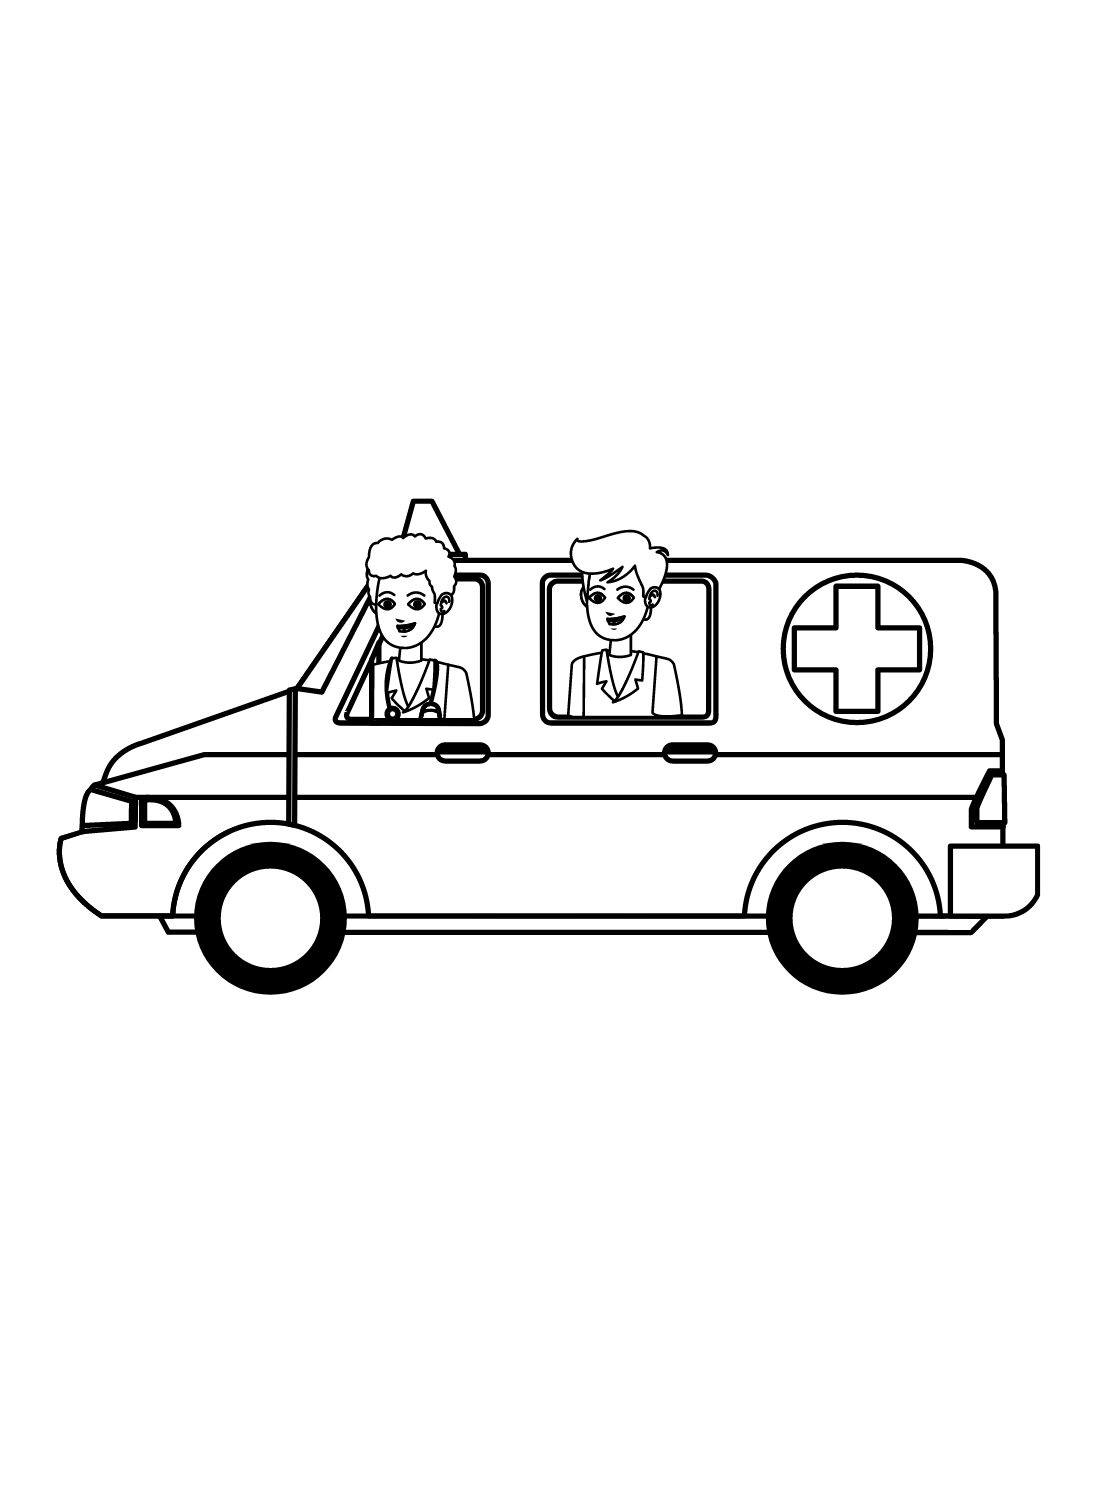 Ambulance coloring pages printable for free download